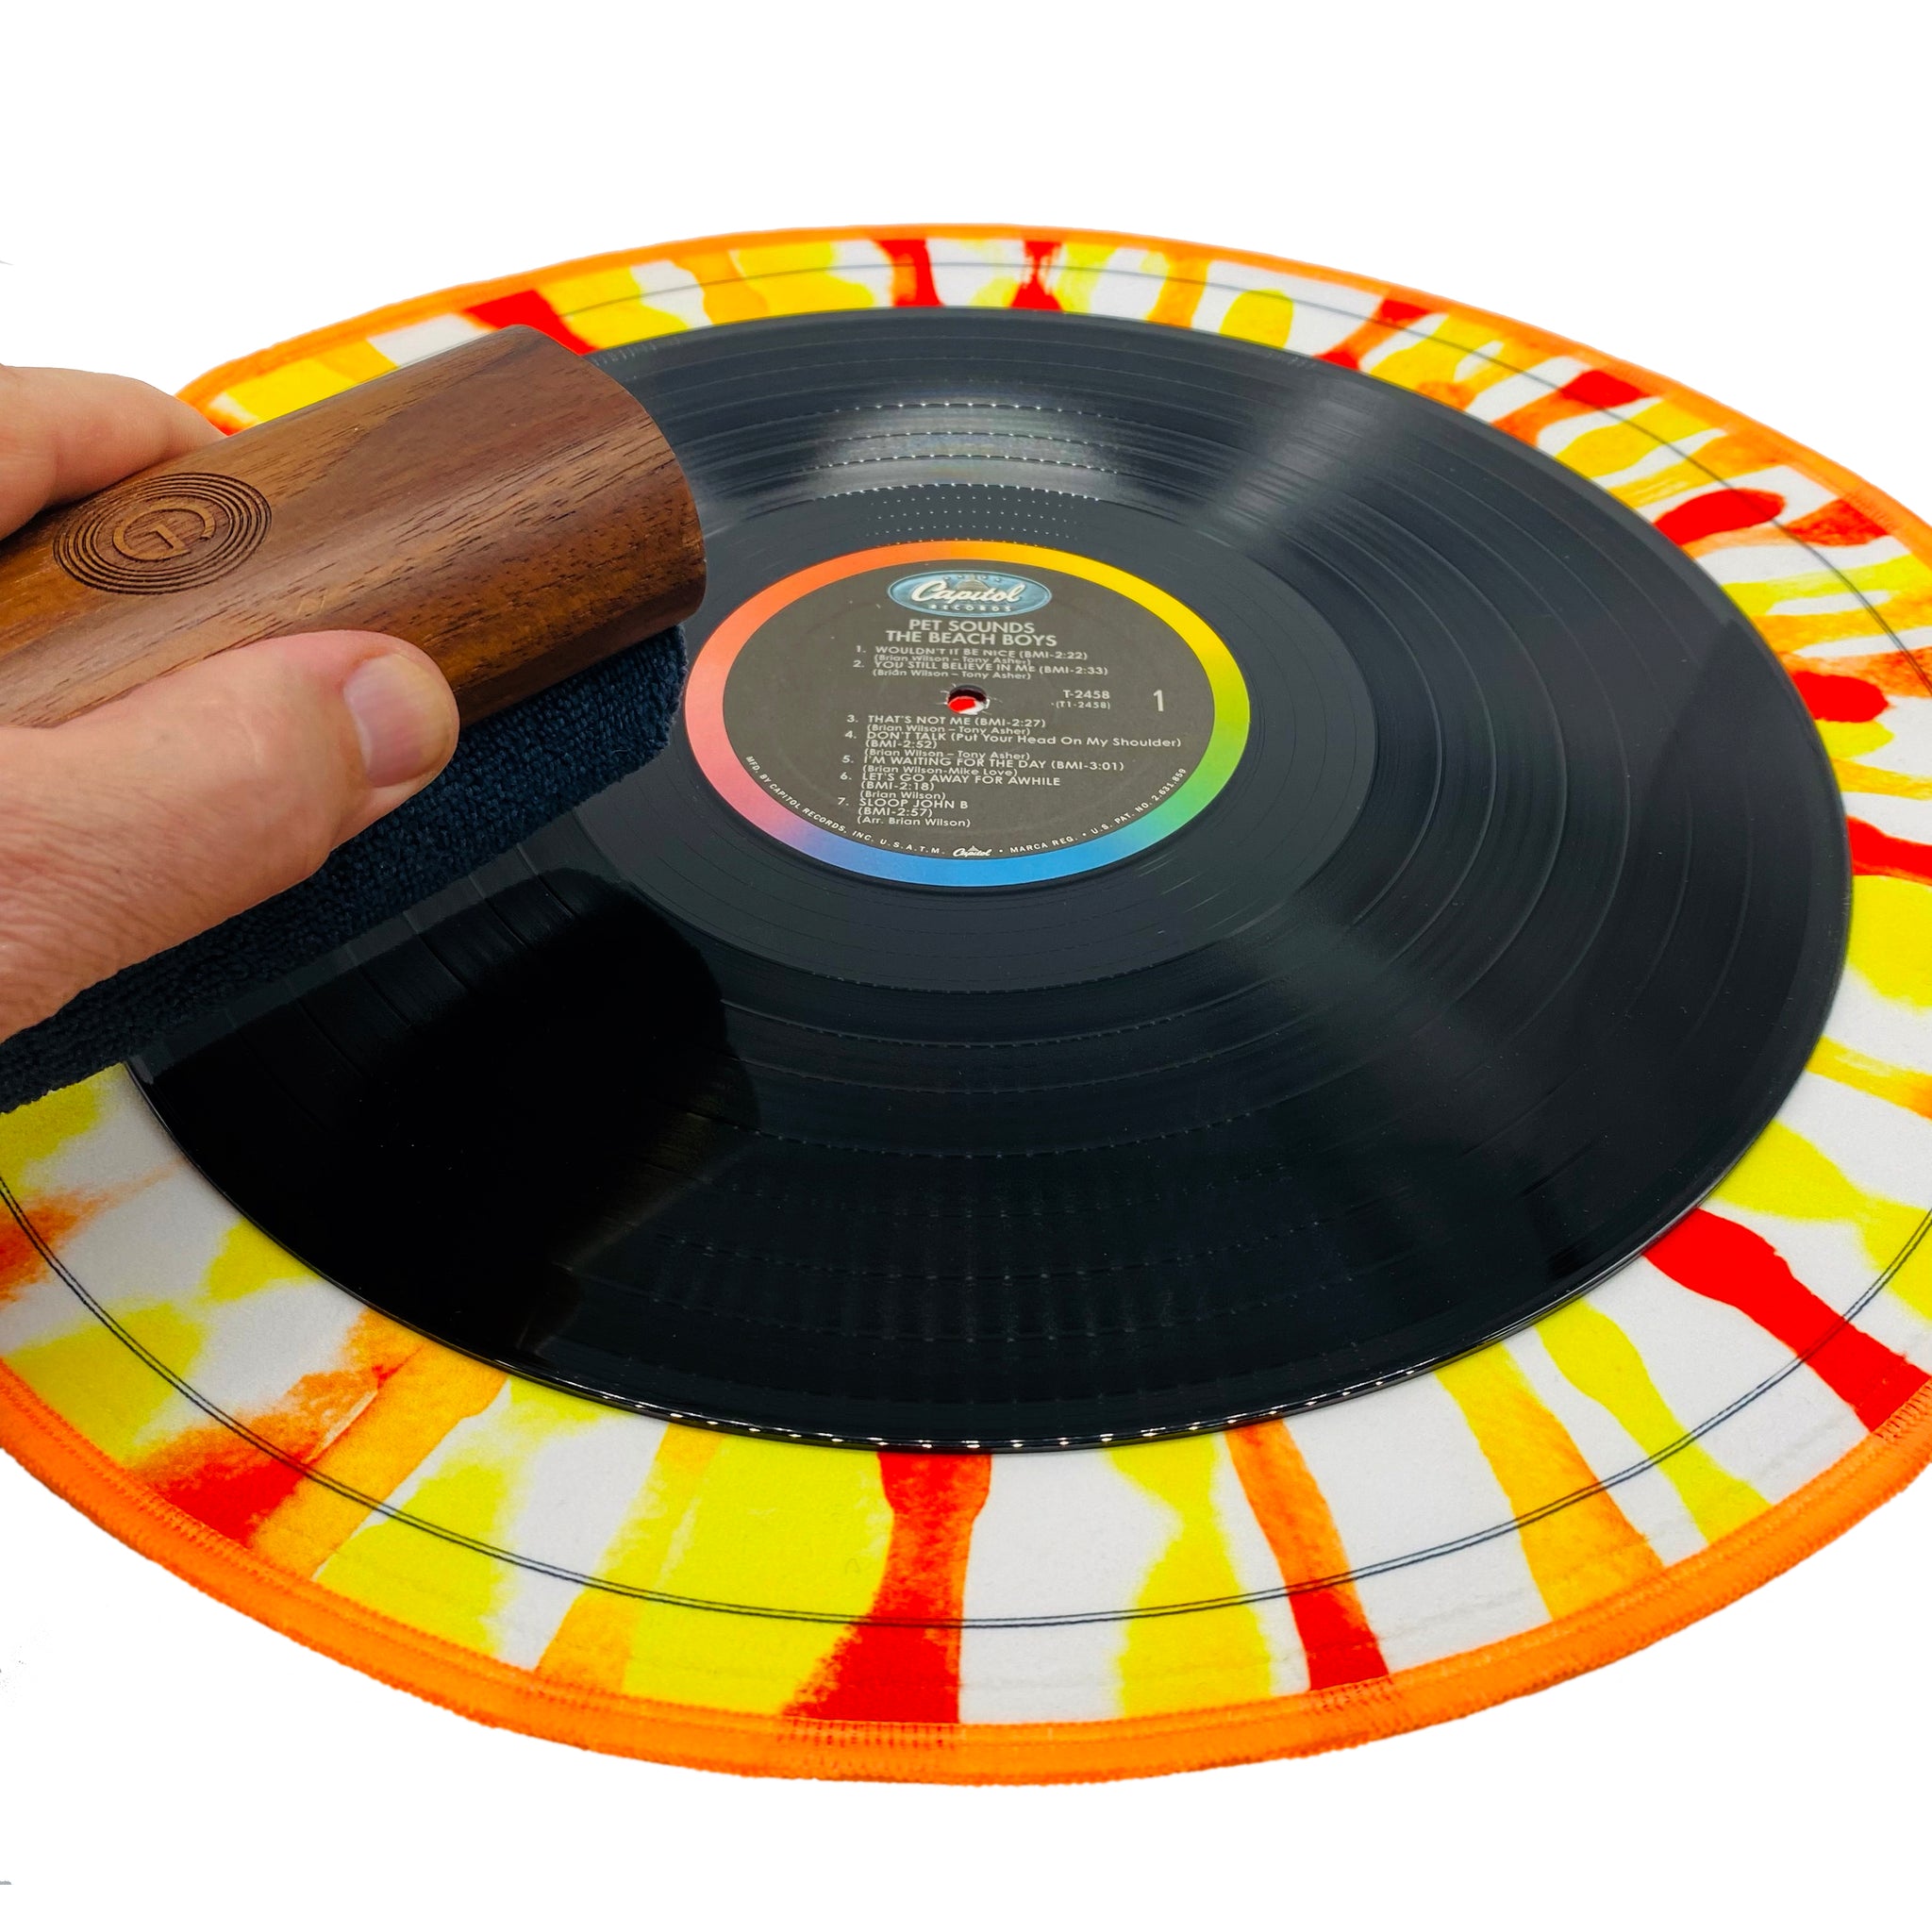 Using GrooveWasher Walnut Handle to clean a record on the 16 inch tie dye splash mat